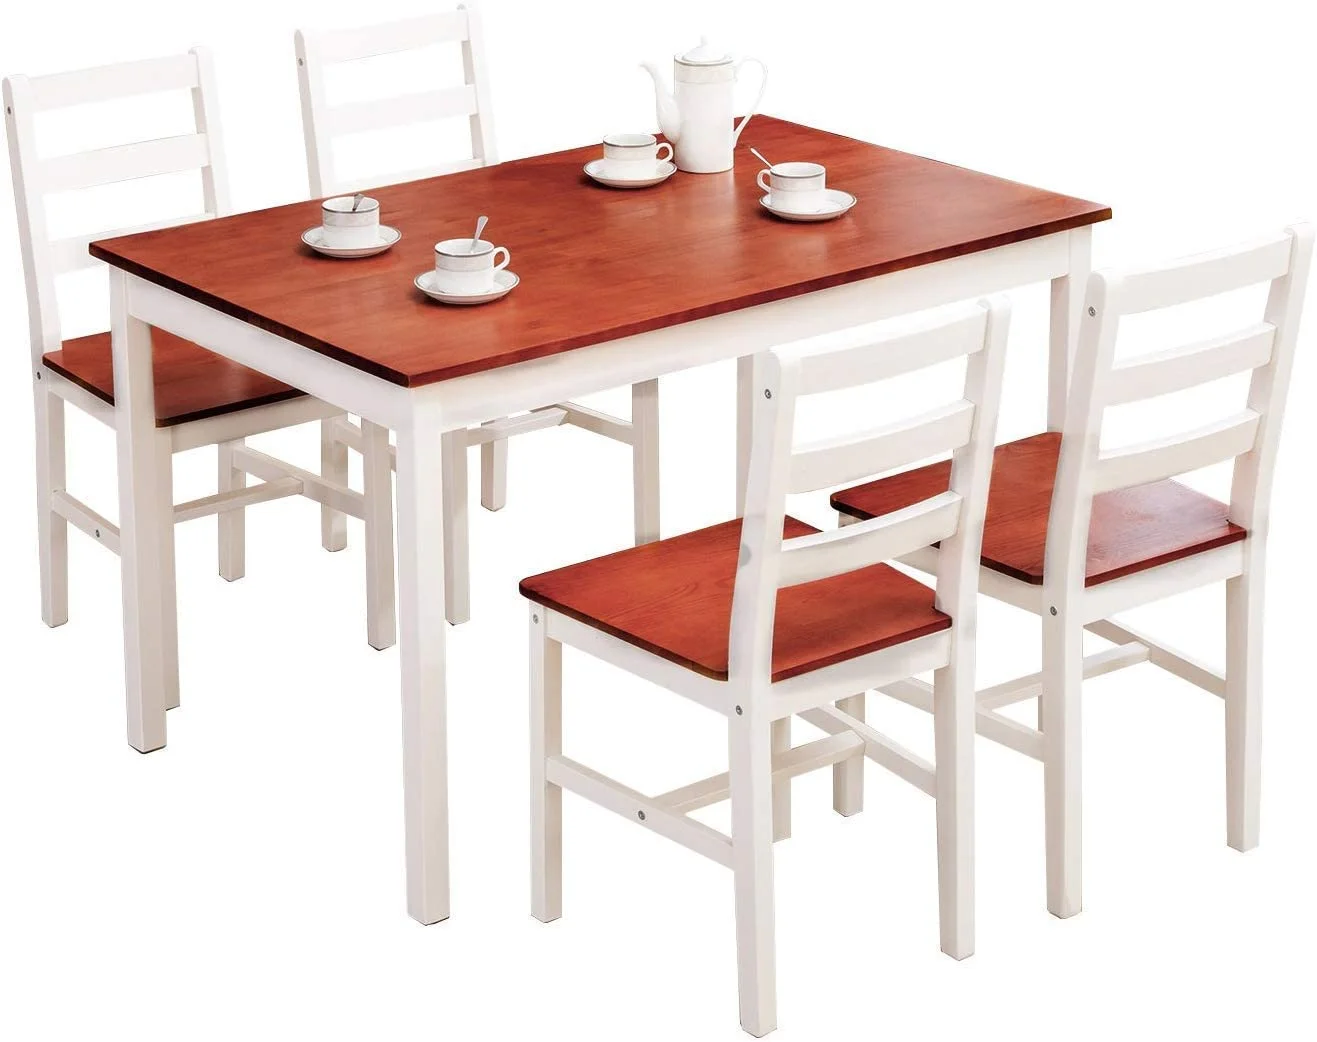 Modern Wooden Dining Tables And Chairs For Restaurants Furniture Buy Dining Table And Chairs Tables And Chairs For Restaurants Wooden Dining Table And Chairs Product On Alibaba Com